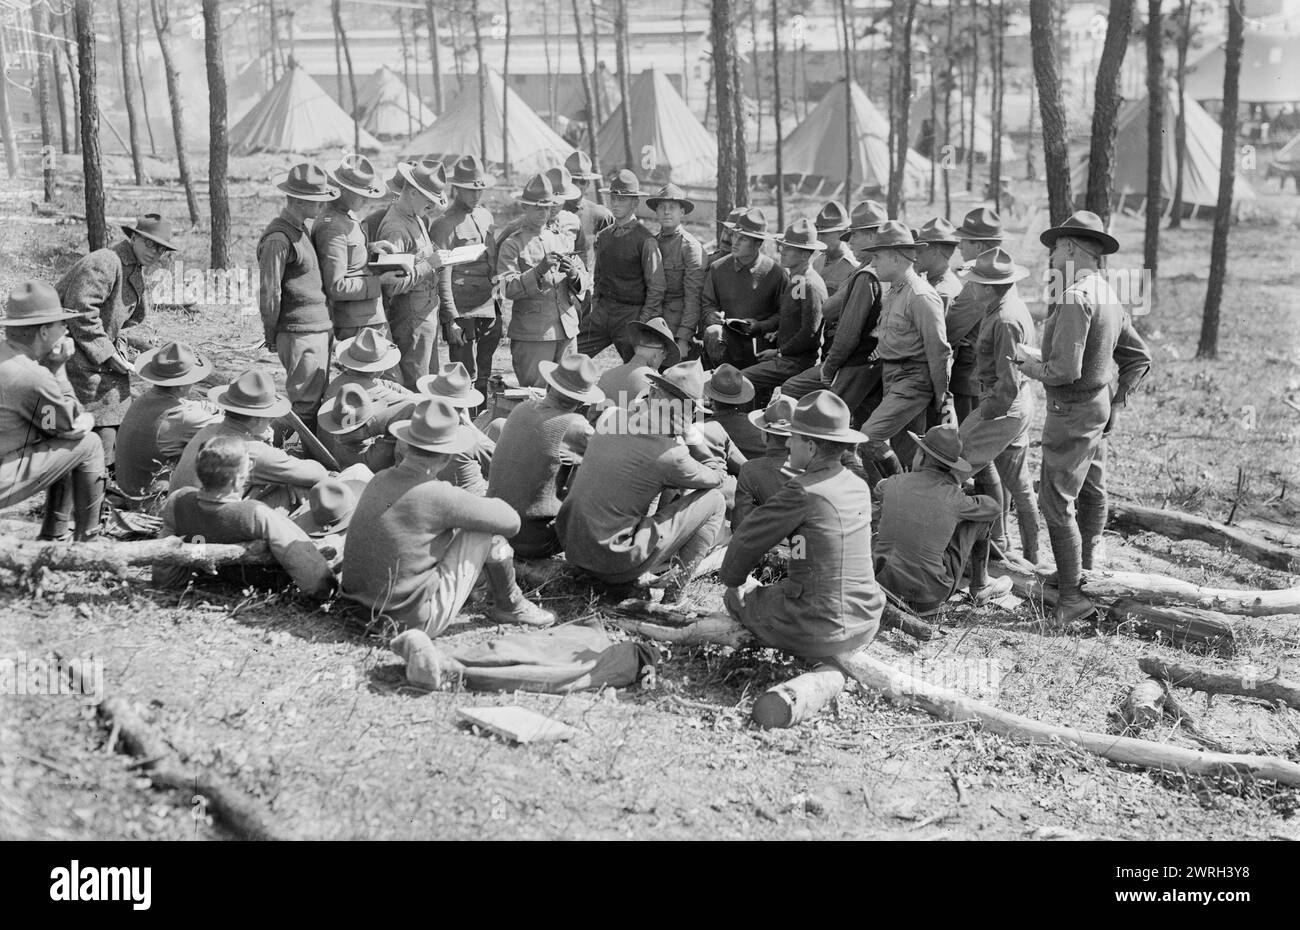 Learning pistol firing, Camp Upton, 15 Sept 1917 (date created or published later). Soldiers at Camp Upton, a U.S. Army installation located on Long Island, in Yaphank, New York during World War I. Stock Photo